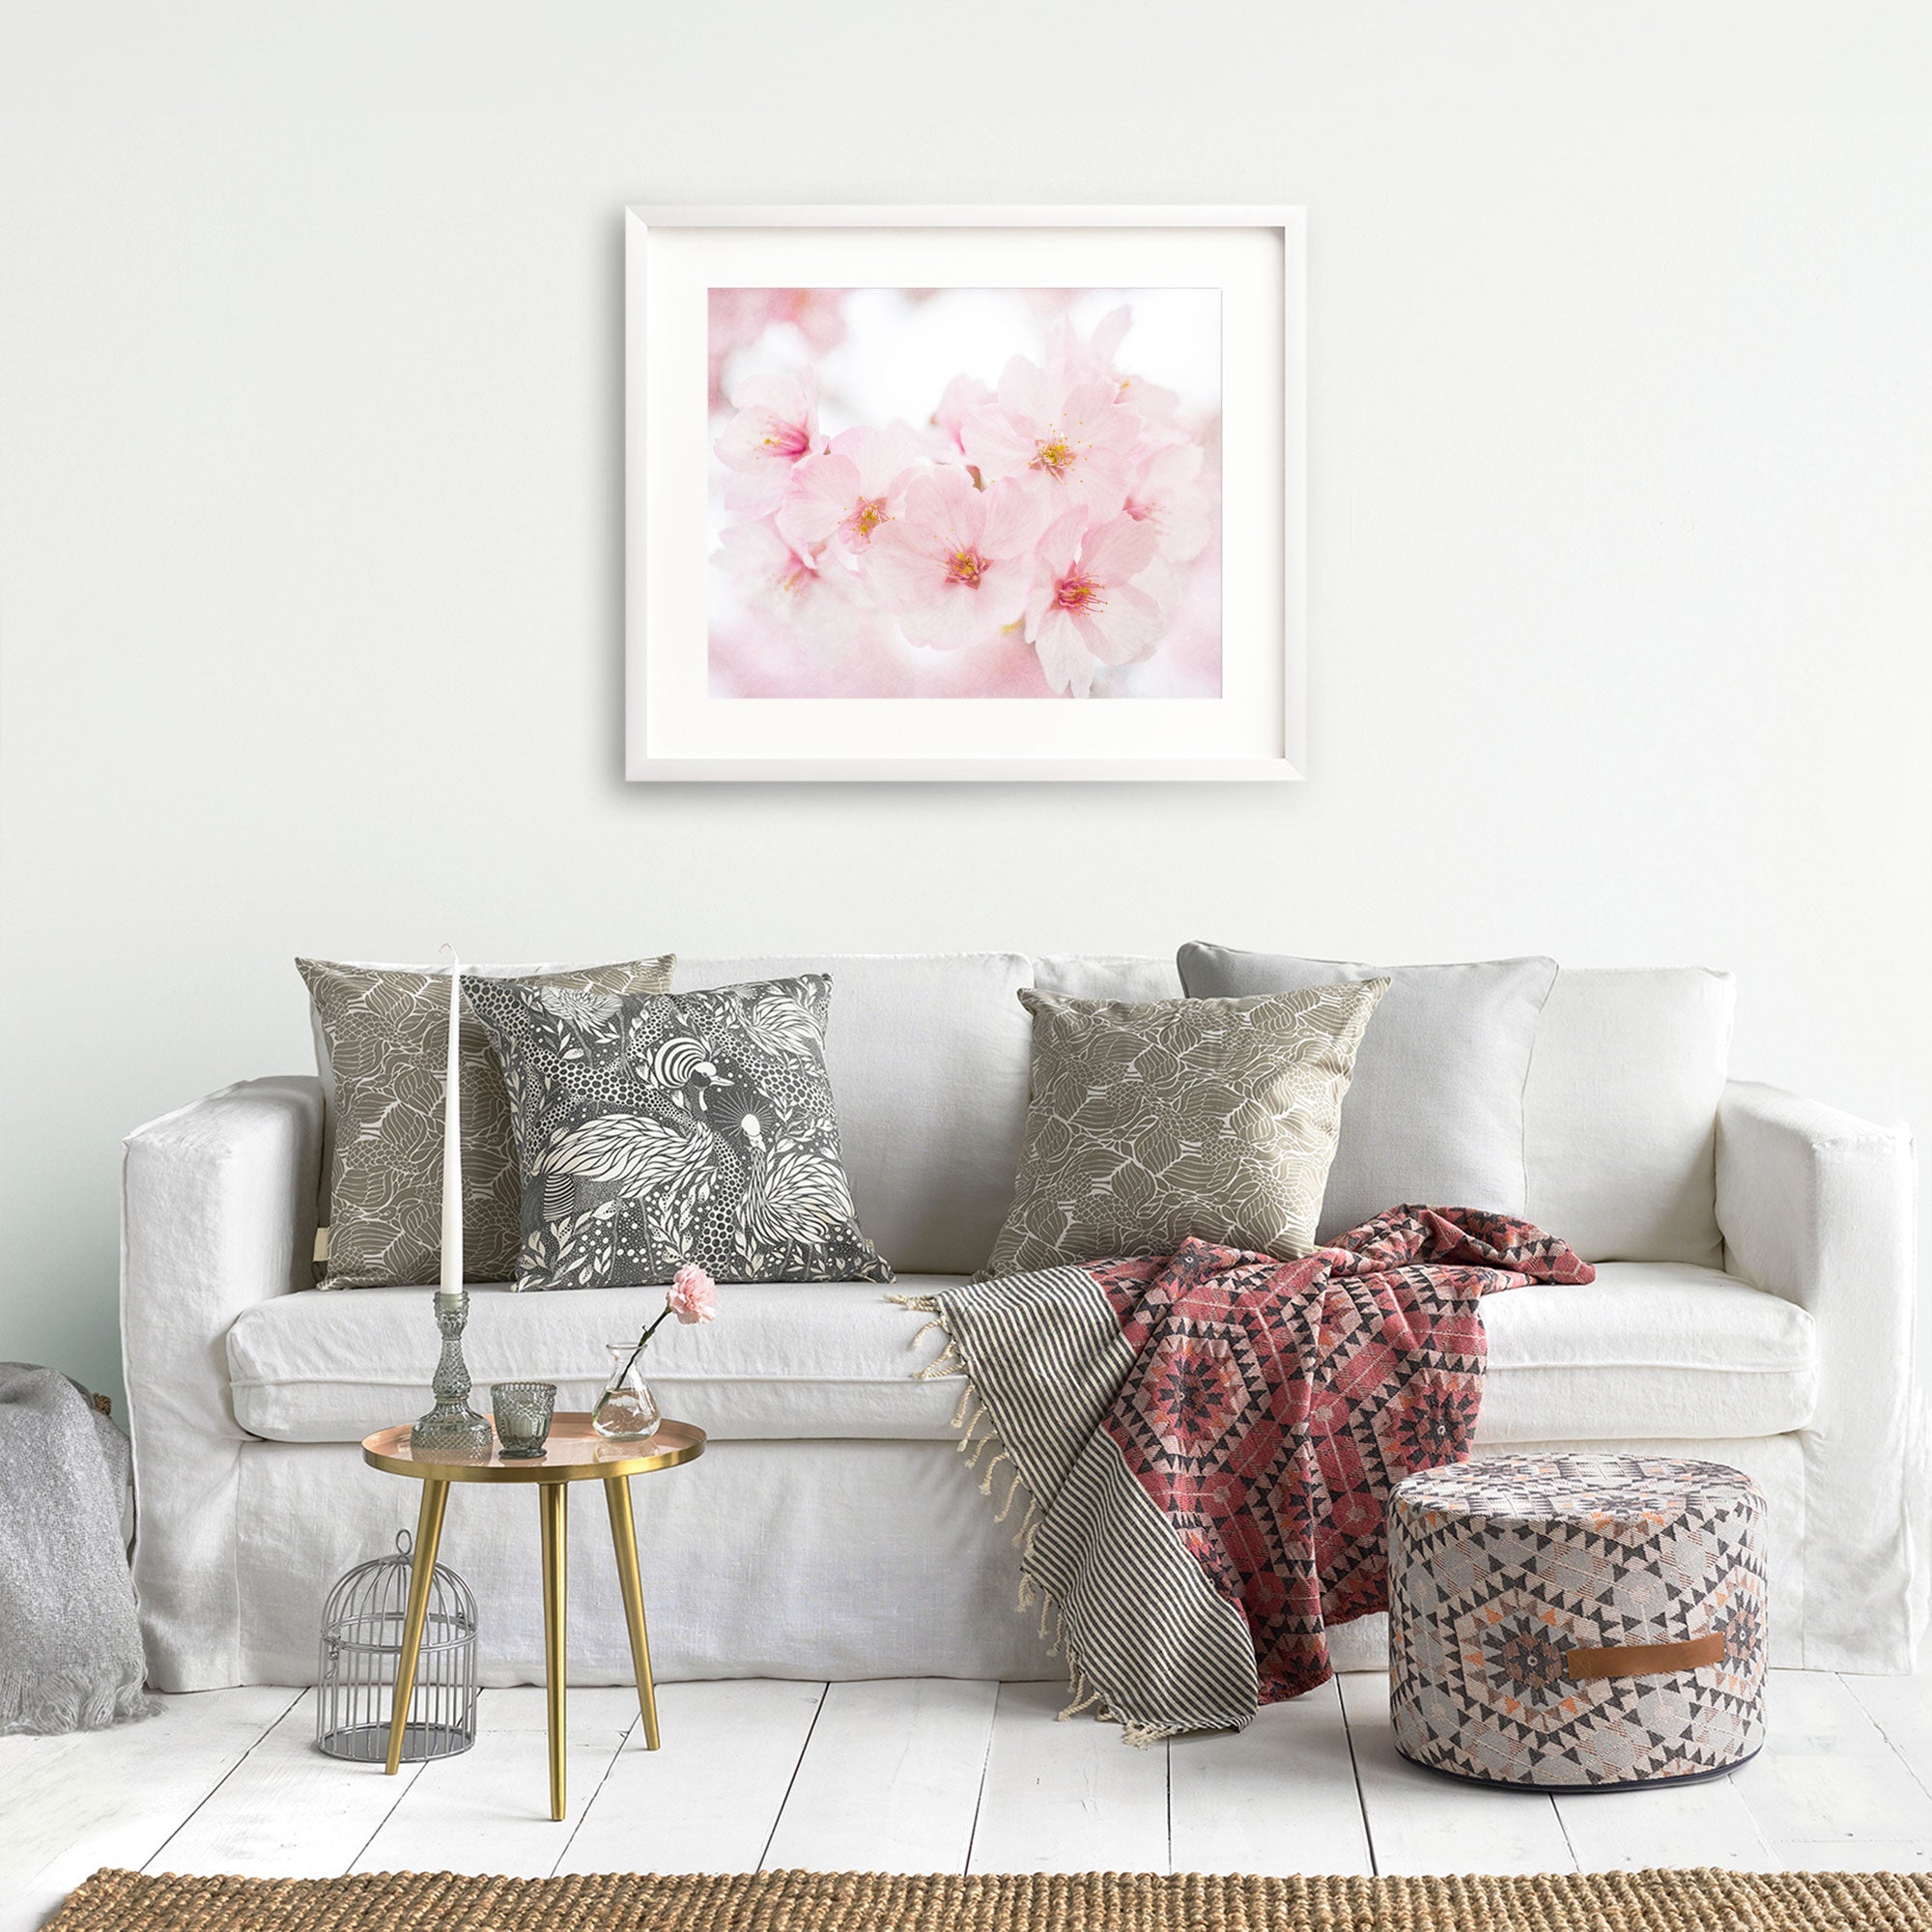 A cozy living room with a white sofa adorned with patterned cushions, a framed Pink Flower Print, &#39;Cherry Blossom&#39; above it on archival photographic paper, a small round table with books, a birdcage, and a kn